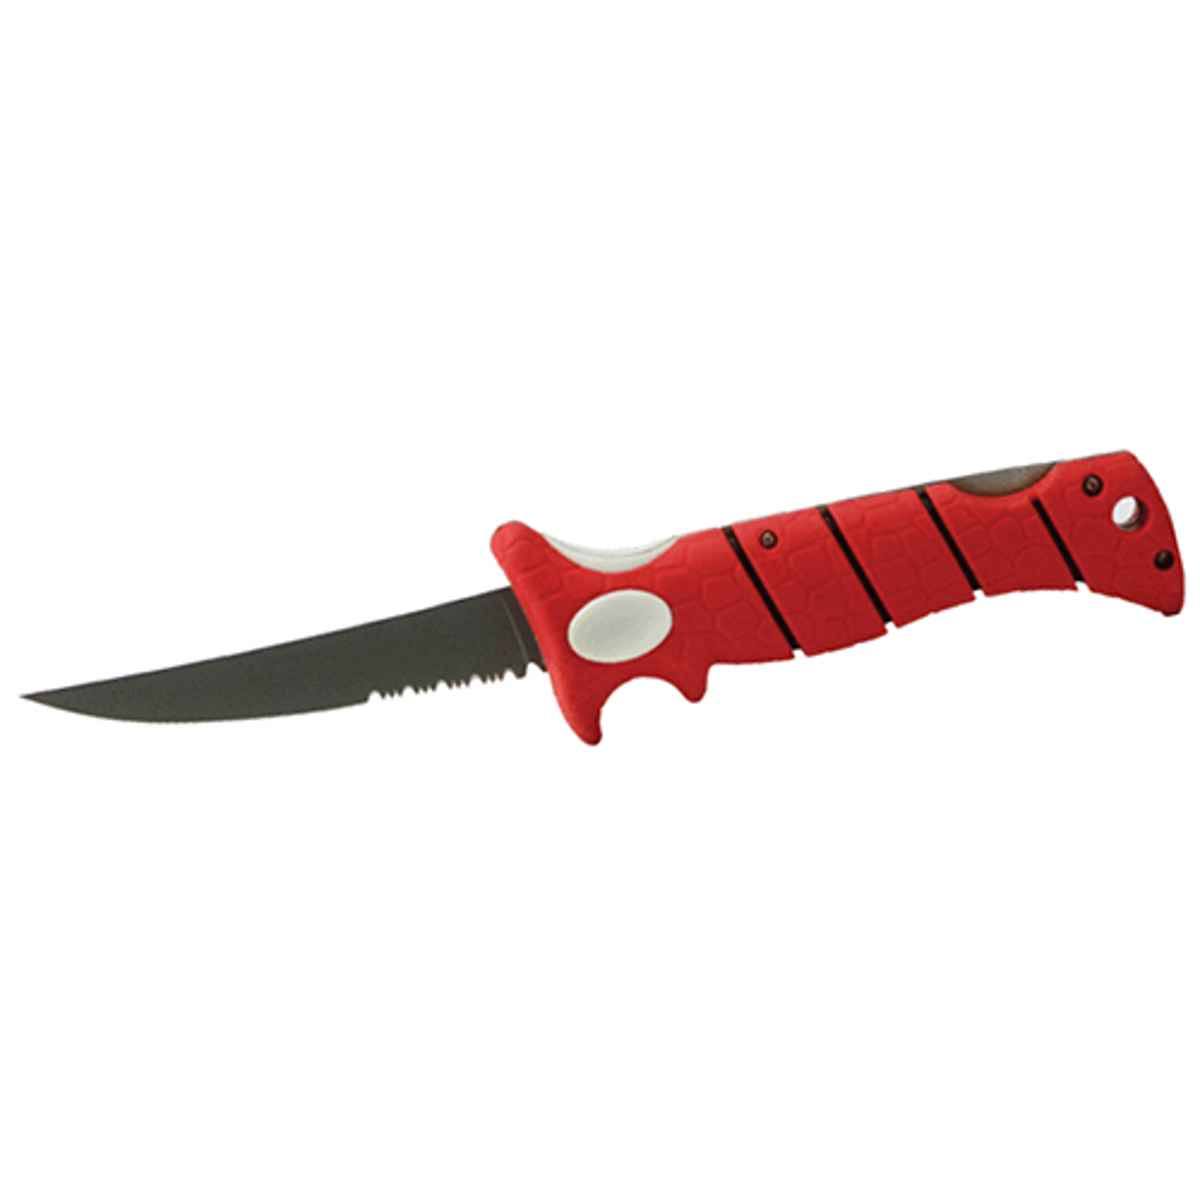 Bubba Blade Lucky Lew Folding Fillet Knife - 5"